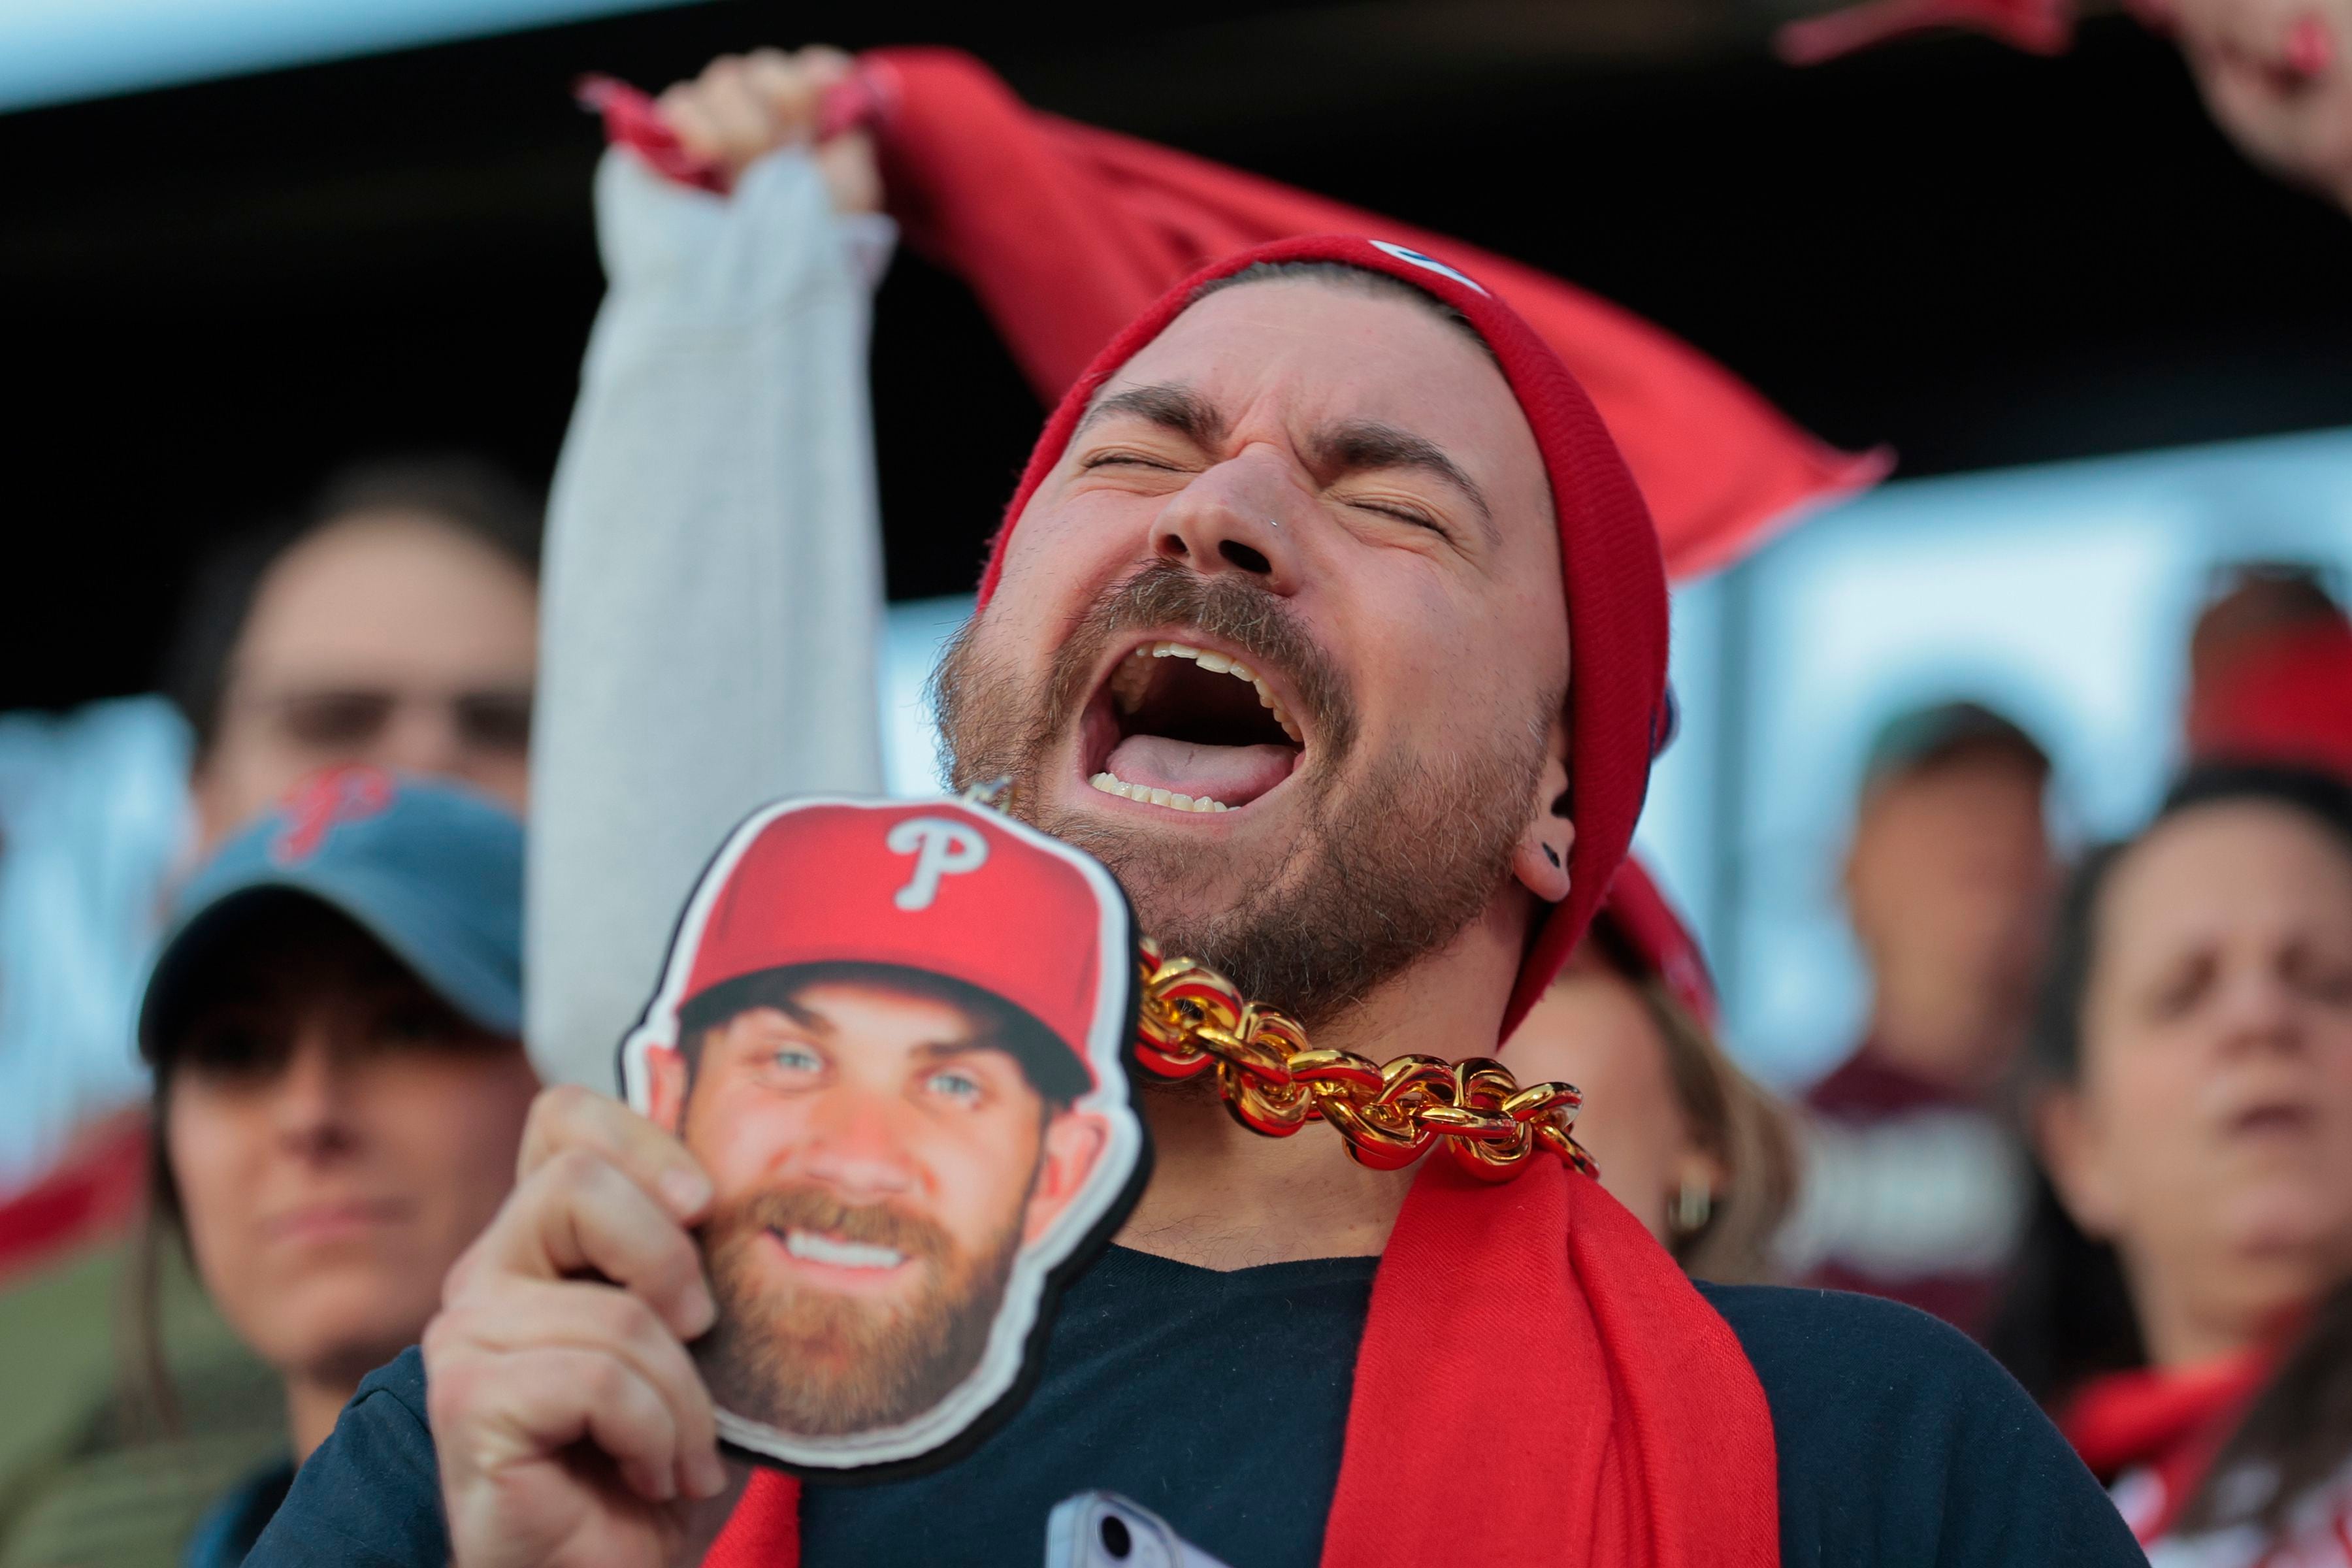 Cincinnati Reds fans react as winning streak comes to an end after loss to  Atlanta Braves: Proud nonetheless All good, series win coming tomorrow